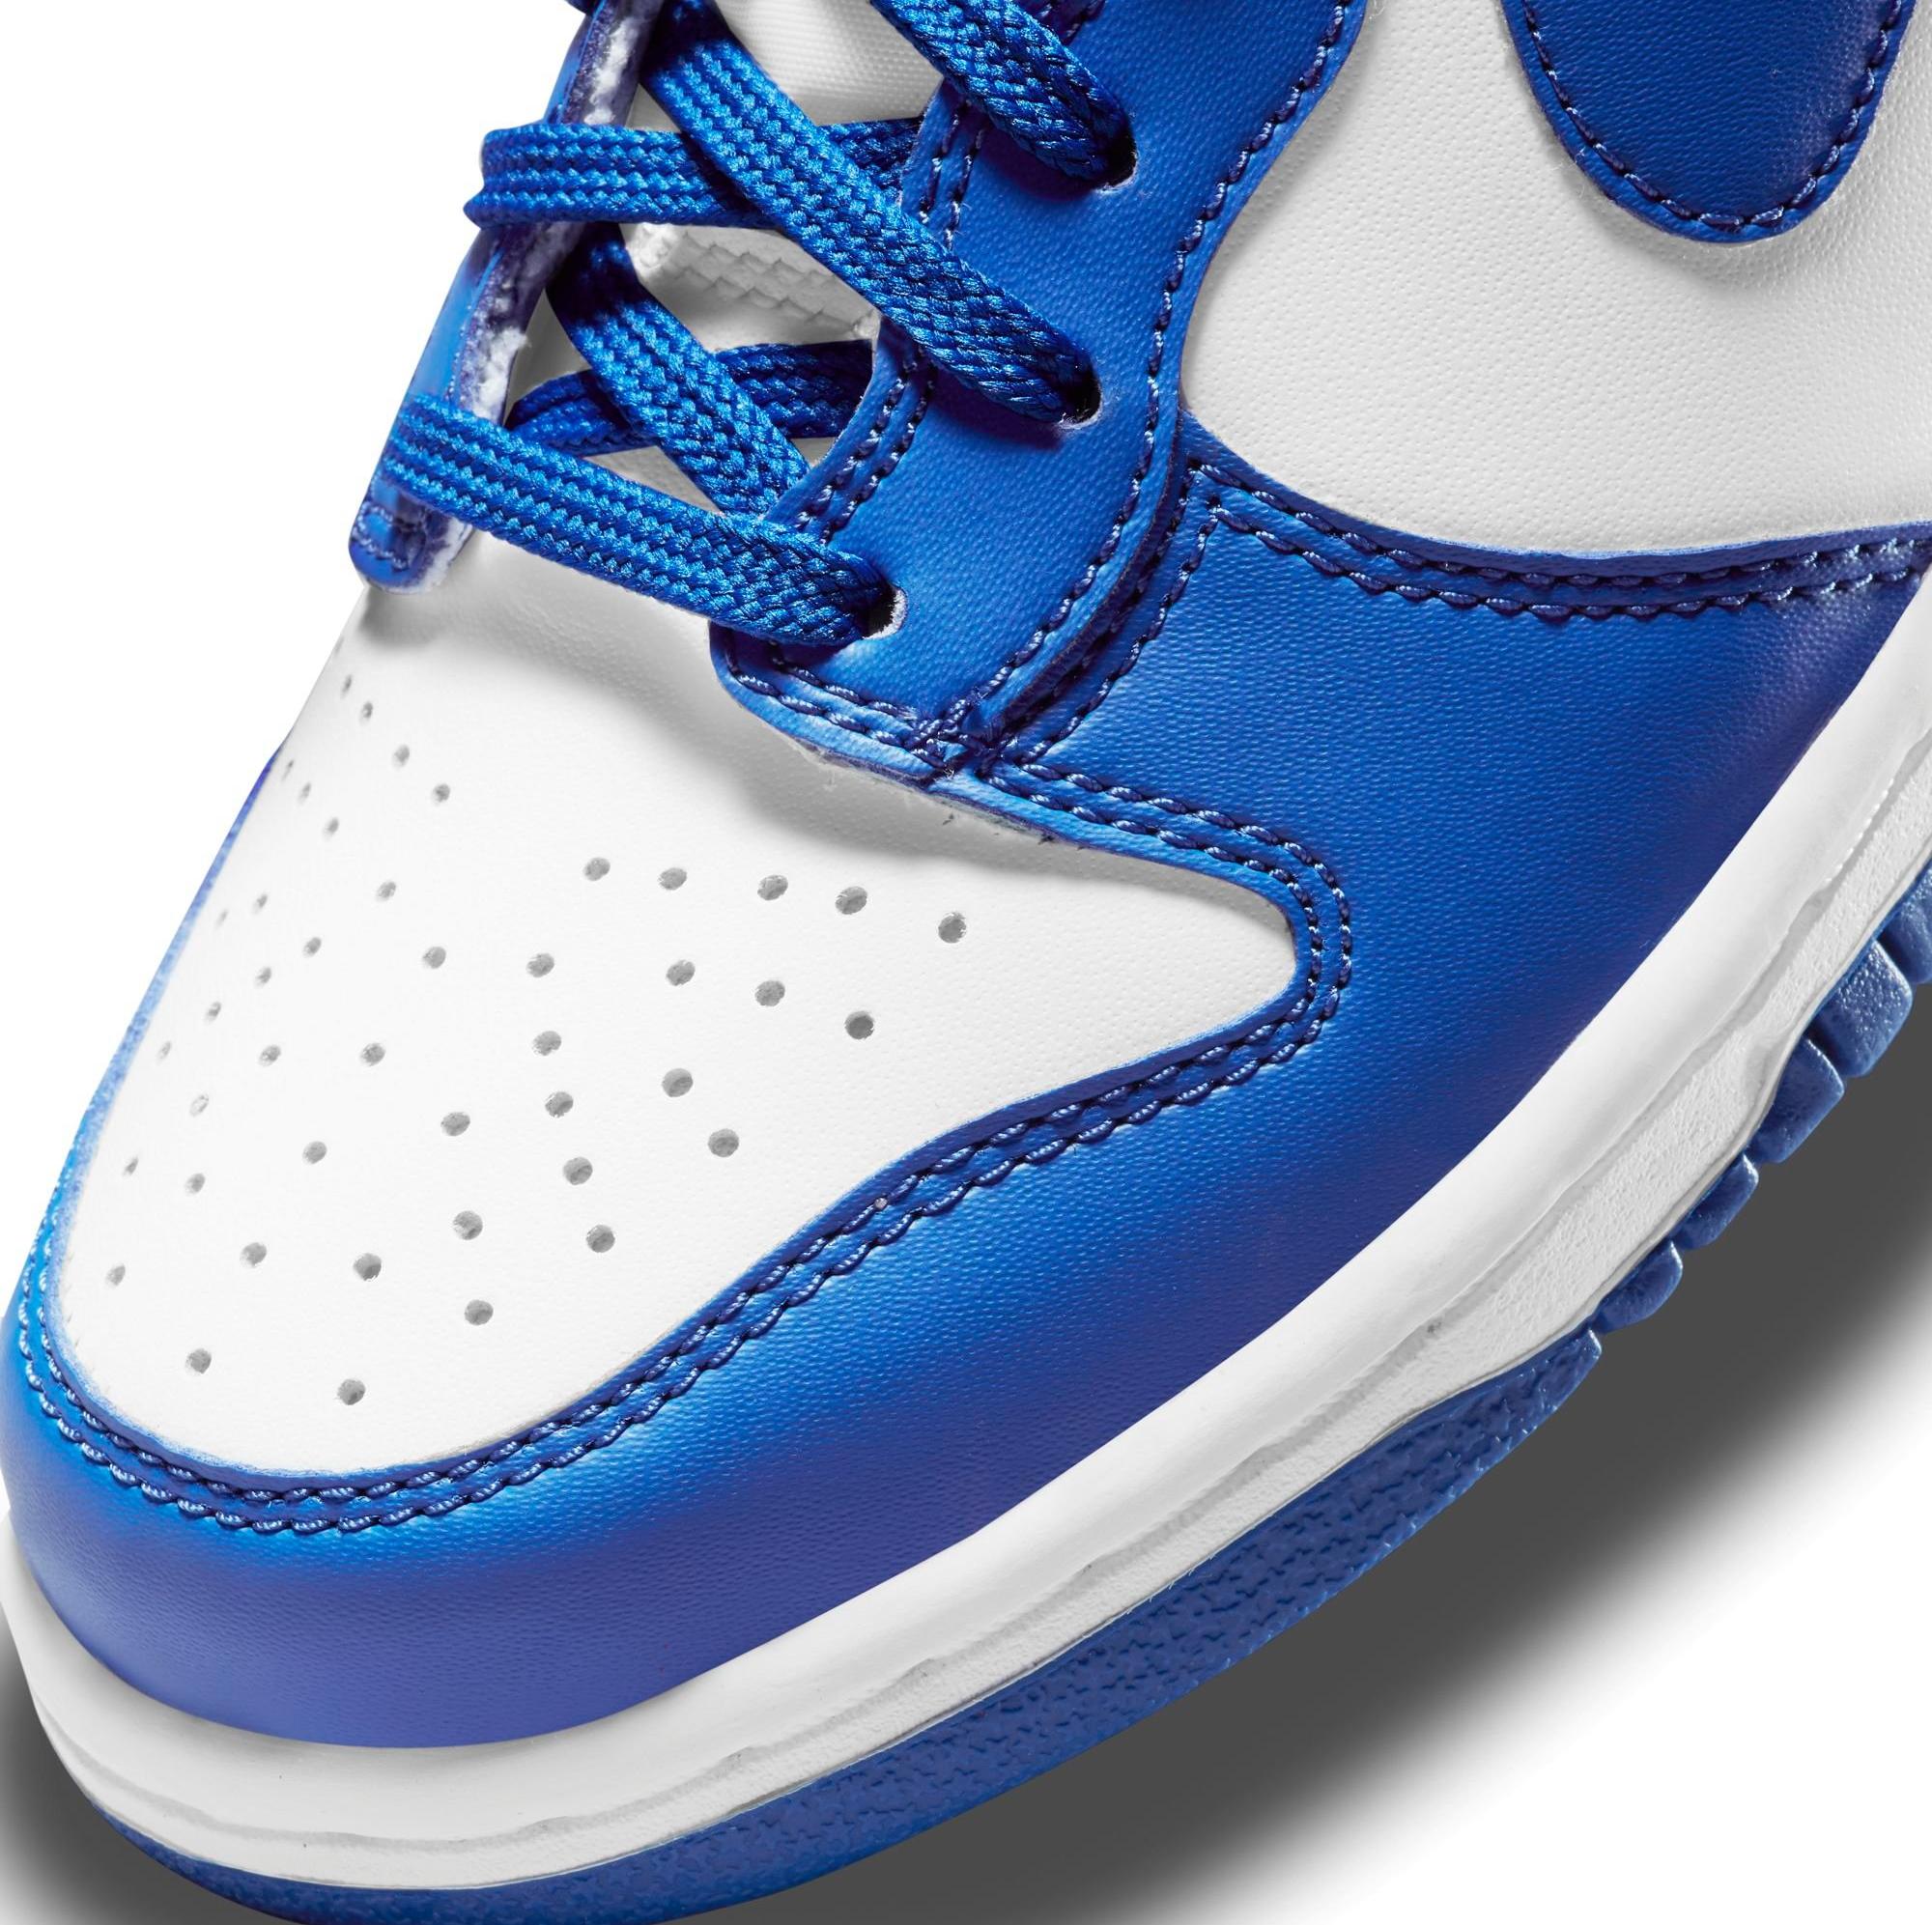 Sneakers Release – “Game Royal” Nike Dunk High Retro Dropping 6/11